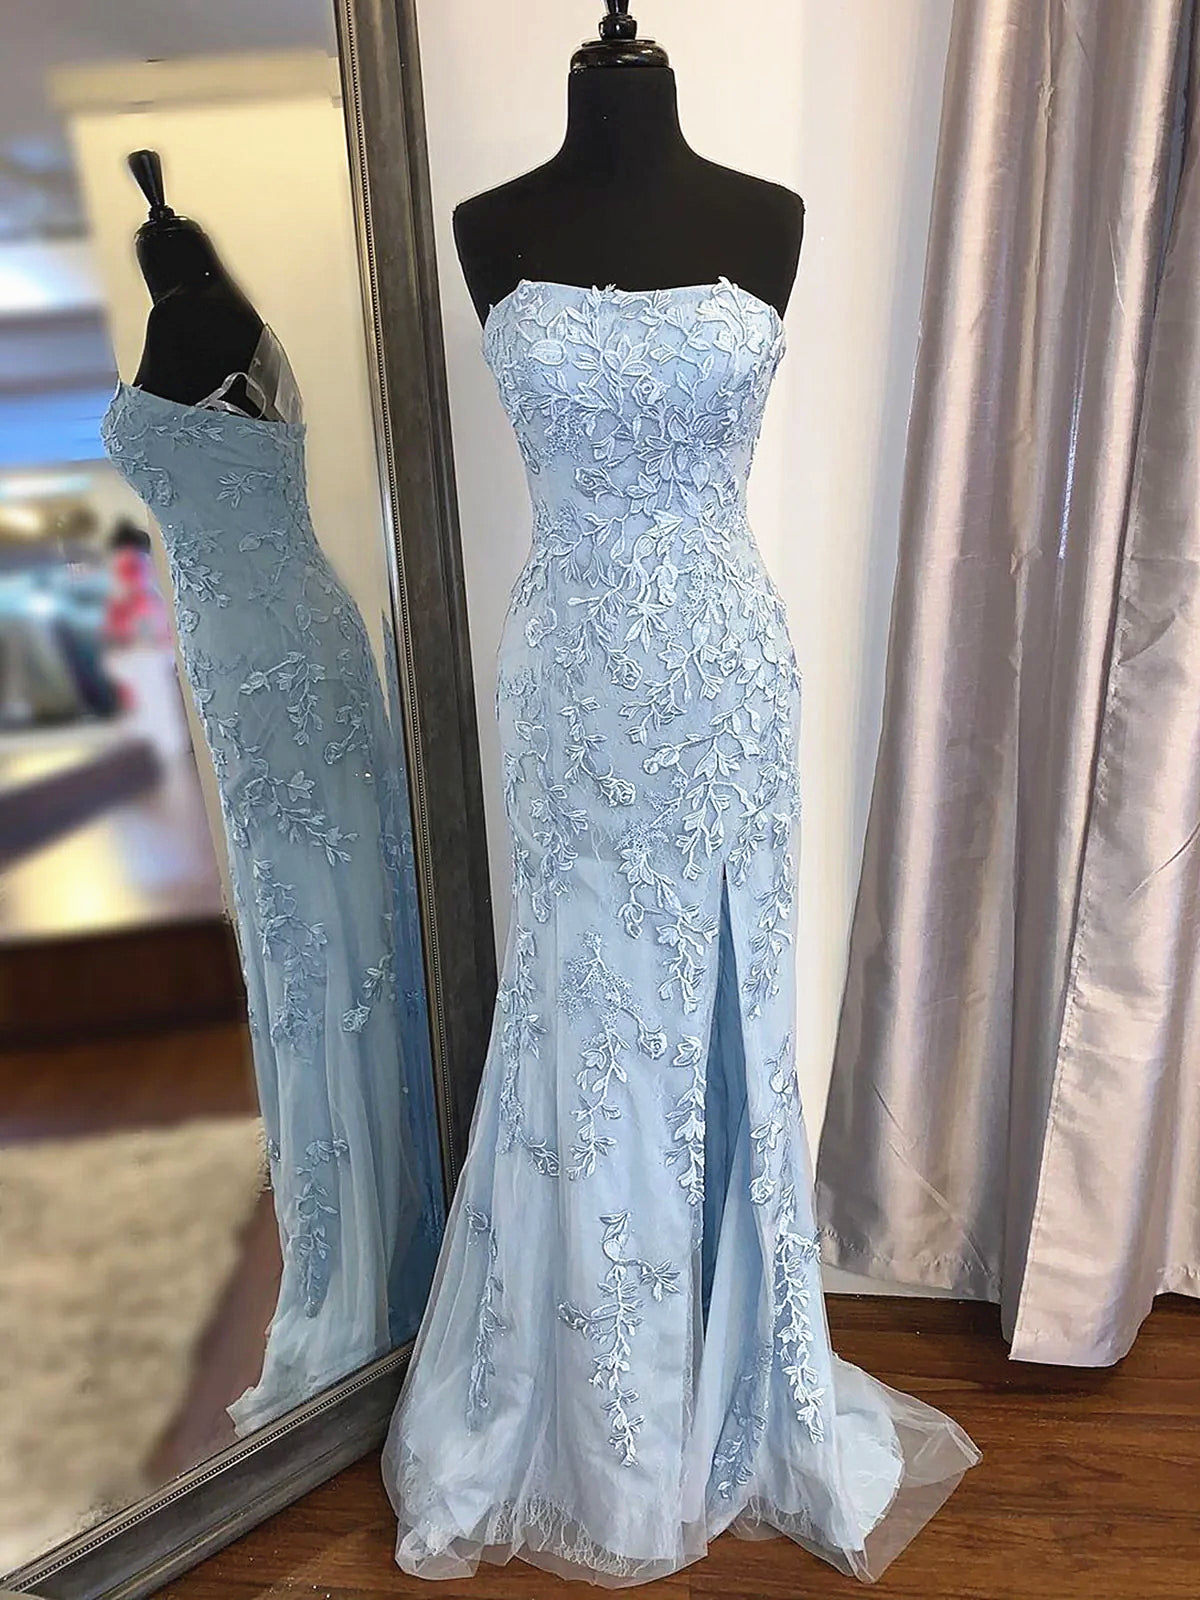 Strapless Sky Blue Lace Mermaid Long Corset Prom Dresses, Blue Lace Mermaid Corset Formal Graduation Dresses outfit, Party Dresses With Boots